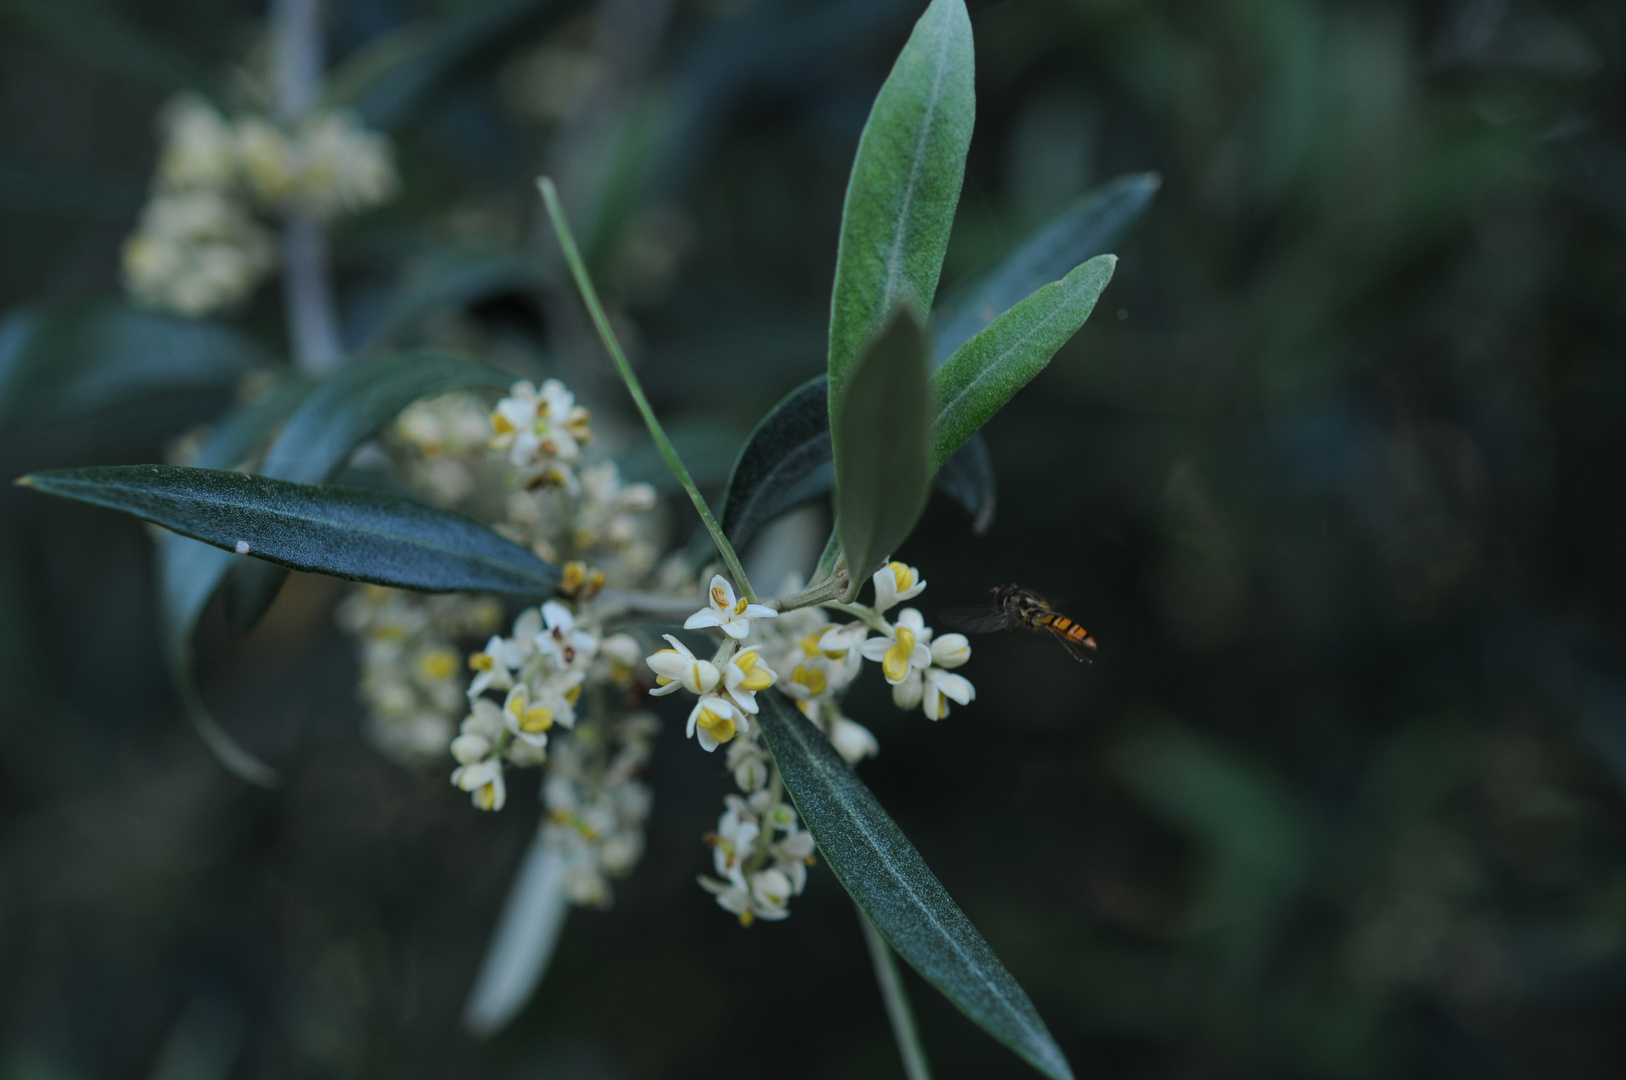 Fiore d'Olivo (Olive Flower)